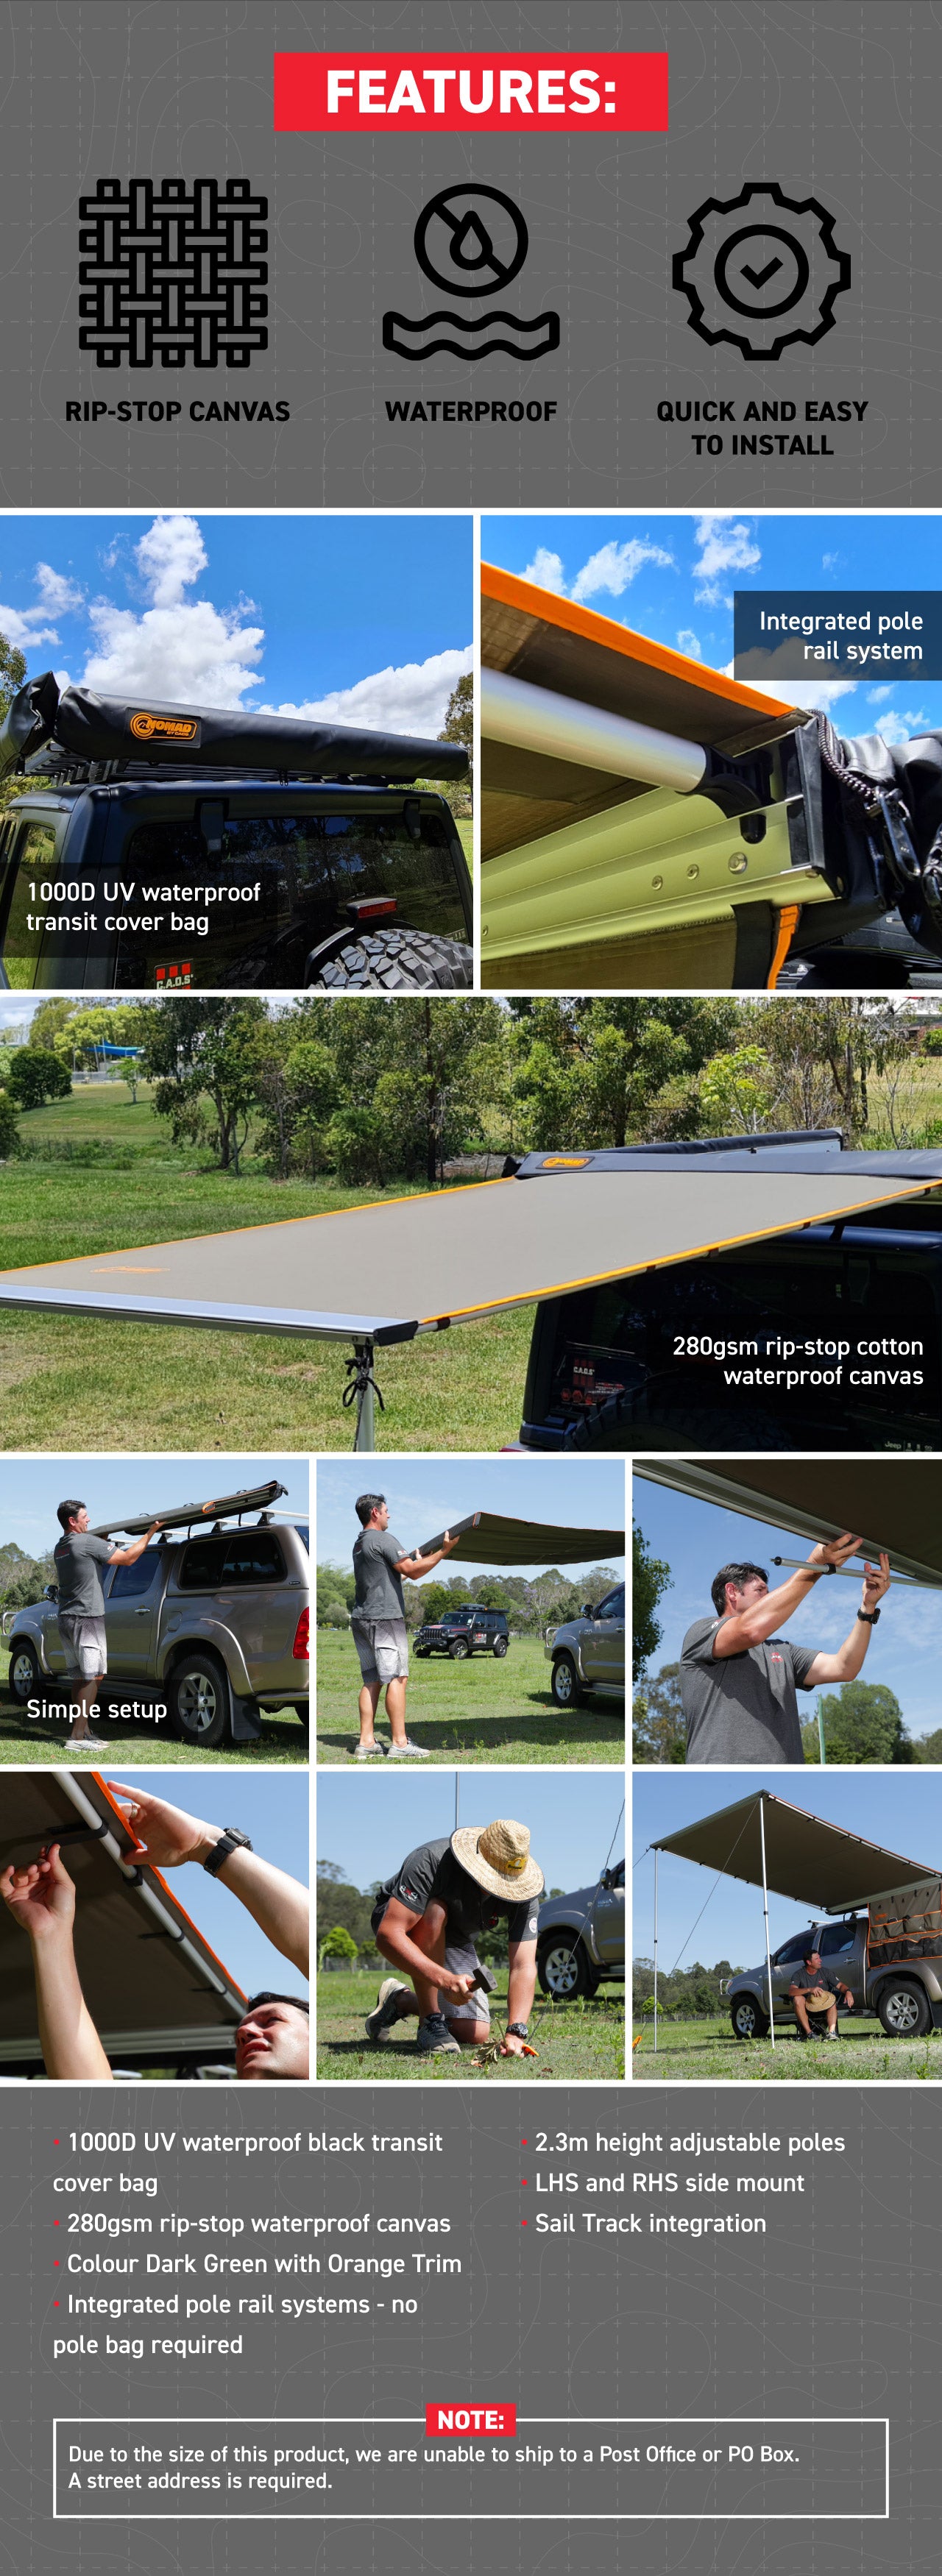 Features of the Product: •	1000D UV waterproof black transit cover bag. •	280gsm rip-stop cotton waterproof canvas •	Colour Dark Green with Orange Trim  •	Integrated pole rail systems - no pole bag required •	2.3m height adjustable poles •	LHS and RHS side mount   •	Sail Track integration 